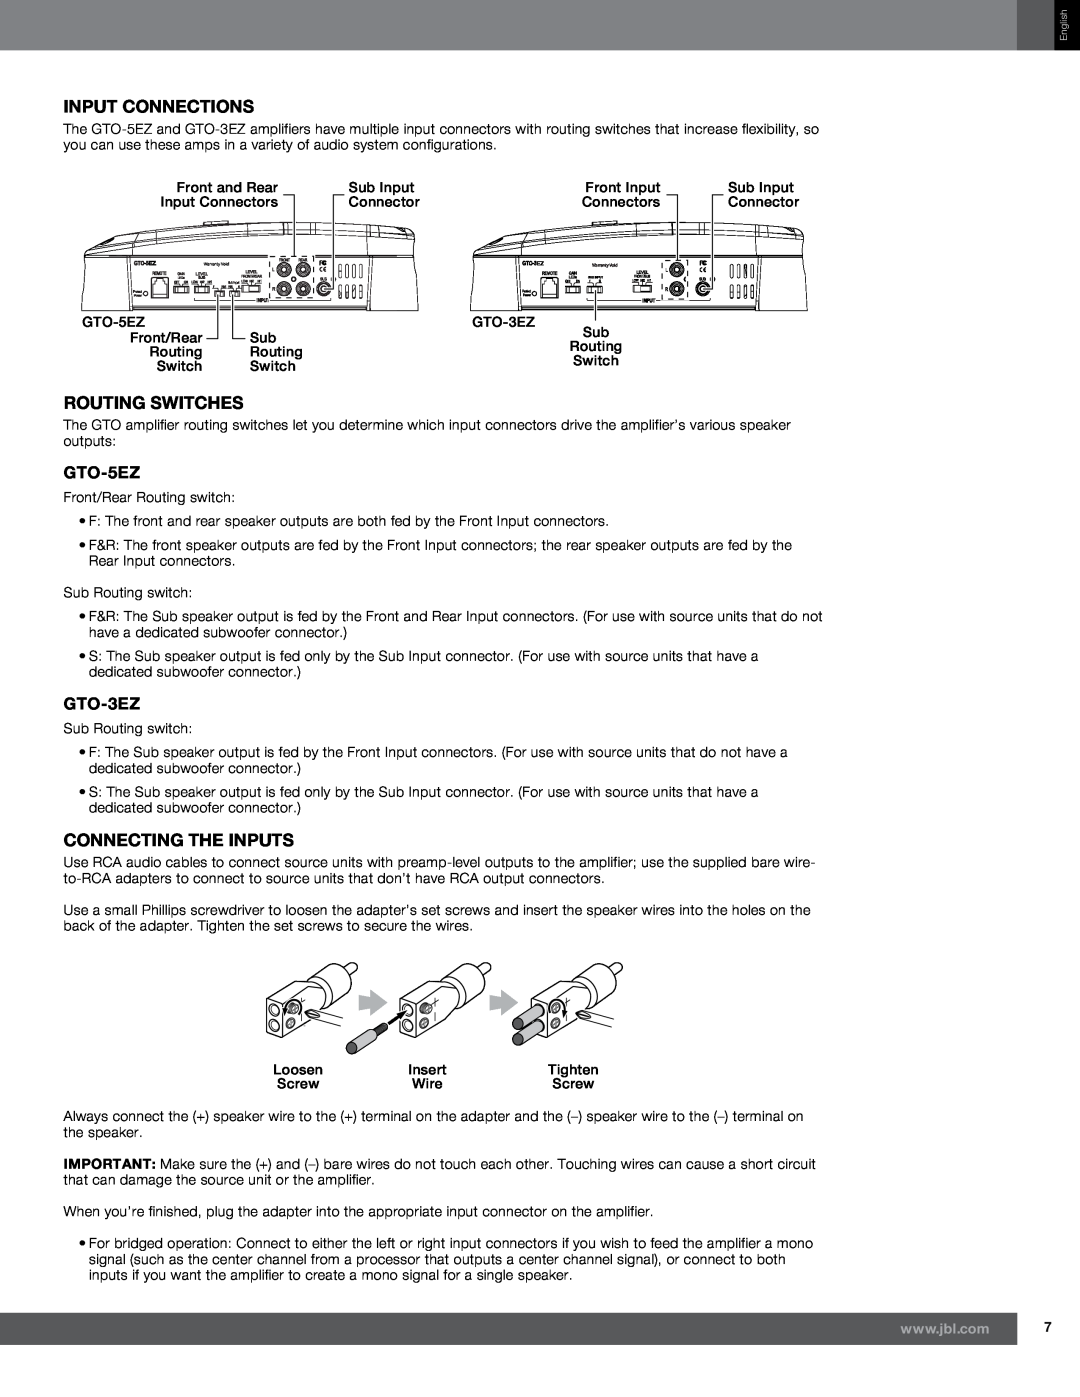 Harman GTO-5EZ owner manual Input Connections, Routing Switches, GTO-3EZ, Connecting the Inputs 